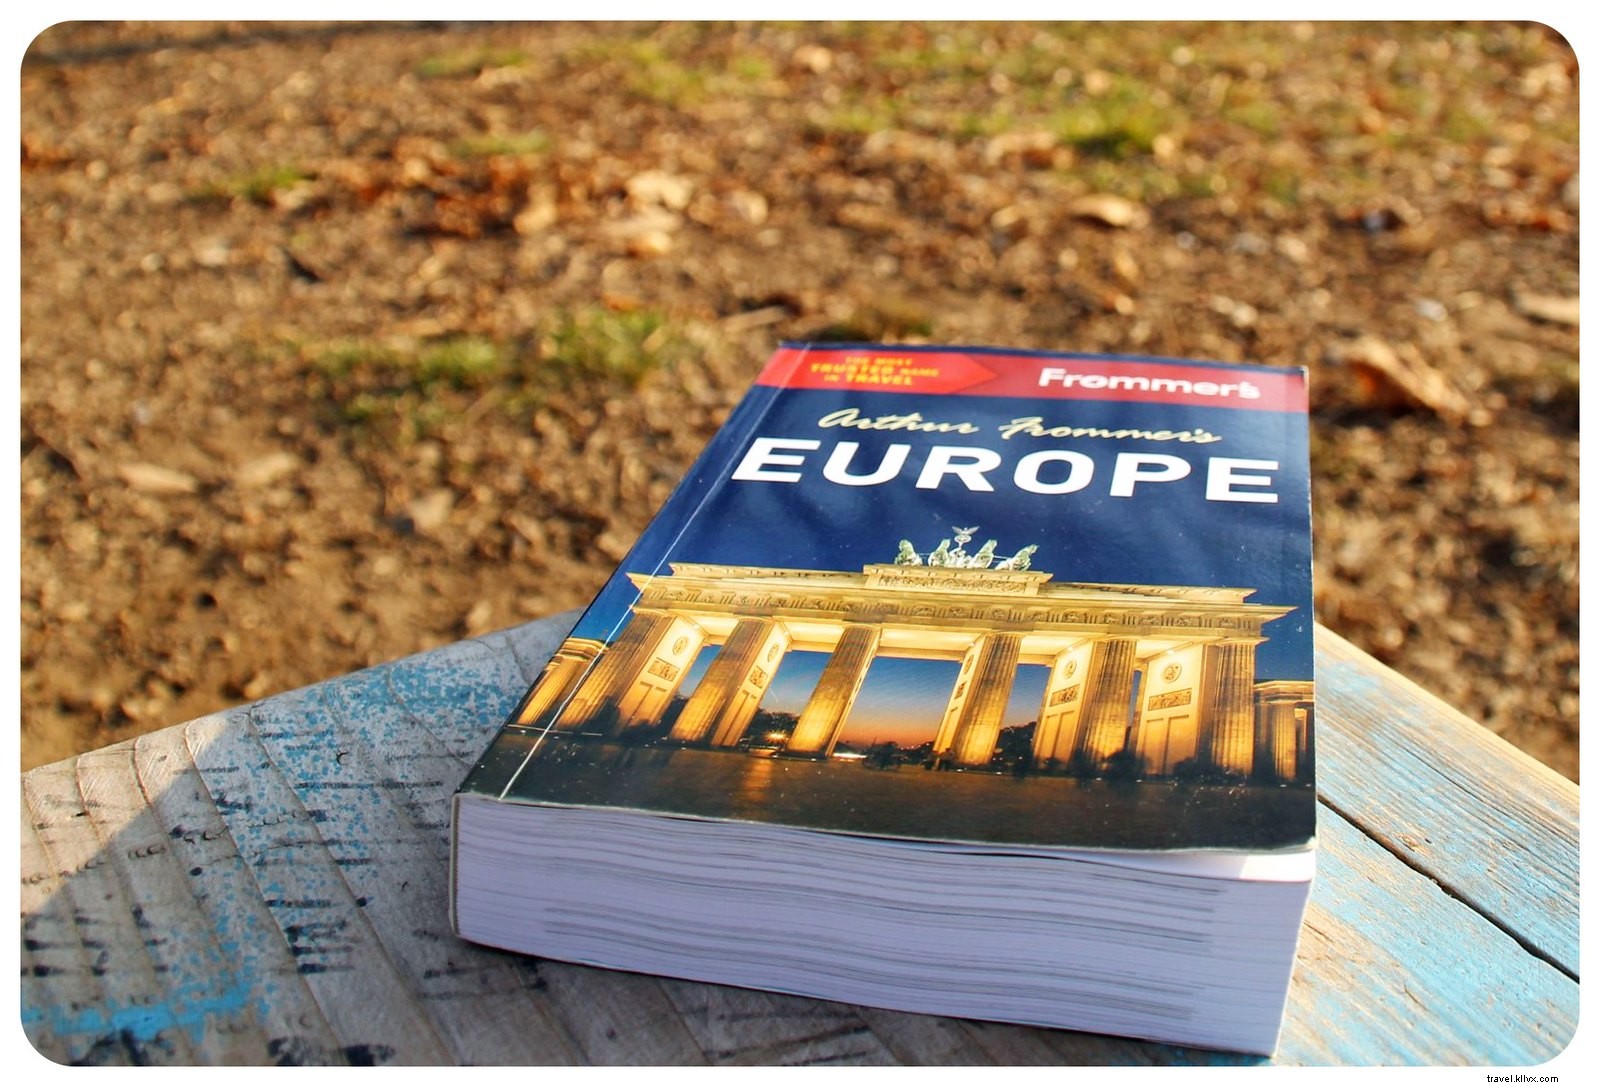 My Holiday Gift Guide For Globetrotters:2015 Edition (+ Guidebook Giveaway!)